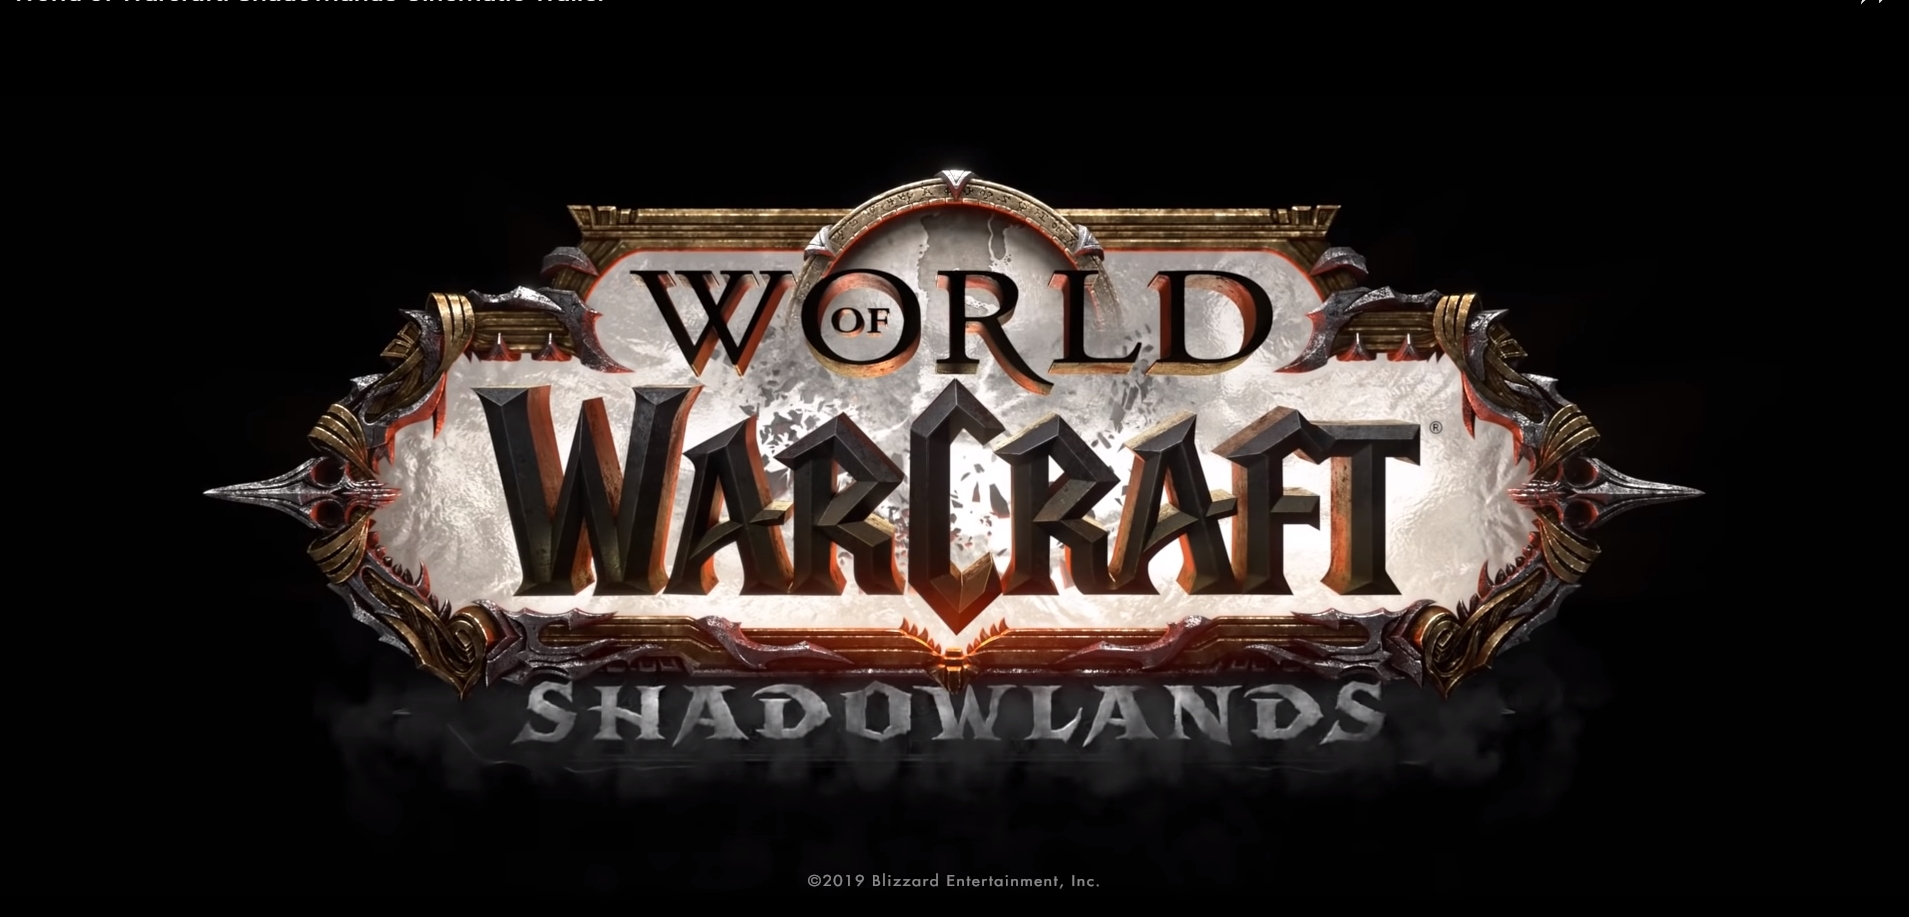 World Of Warcraft Game Director Ion Hazzikostas Releases Development Blog On Upcoming Shadowlands Expansion